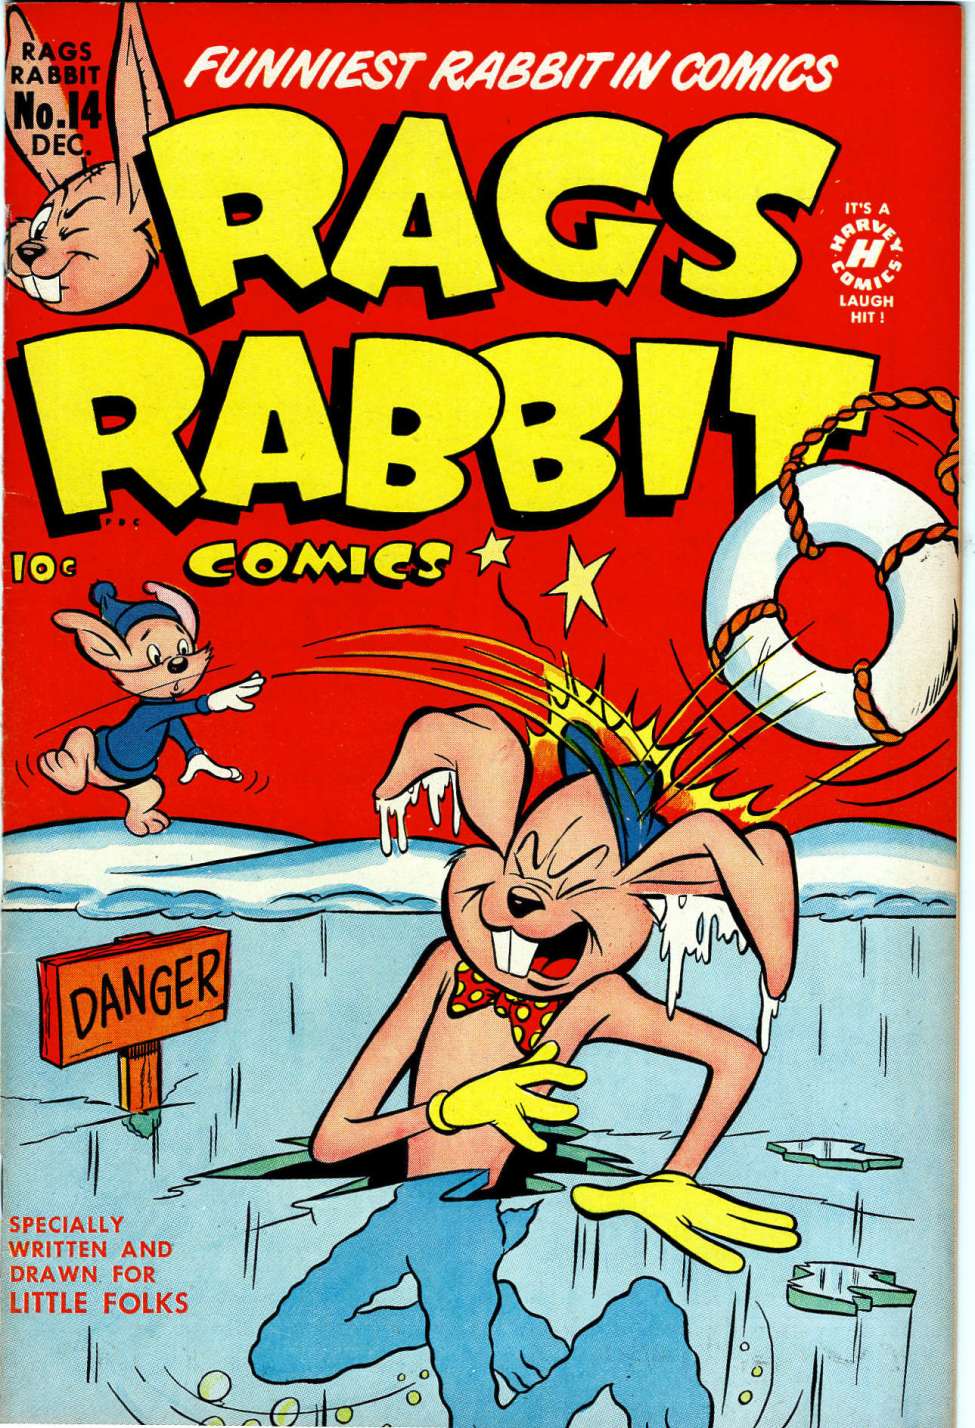 Book Cover For Rags Rabbit 14